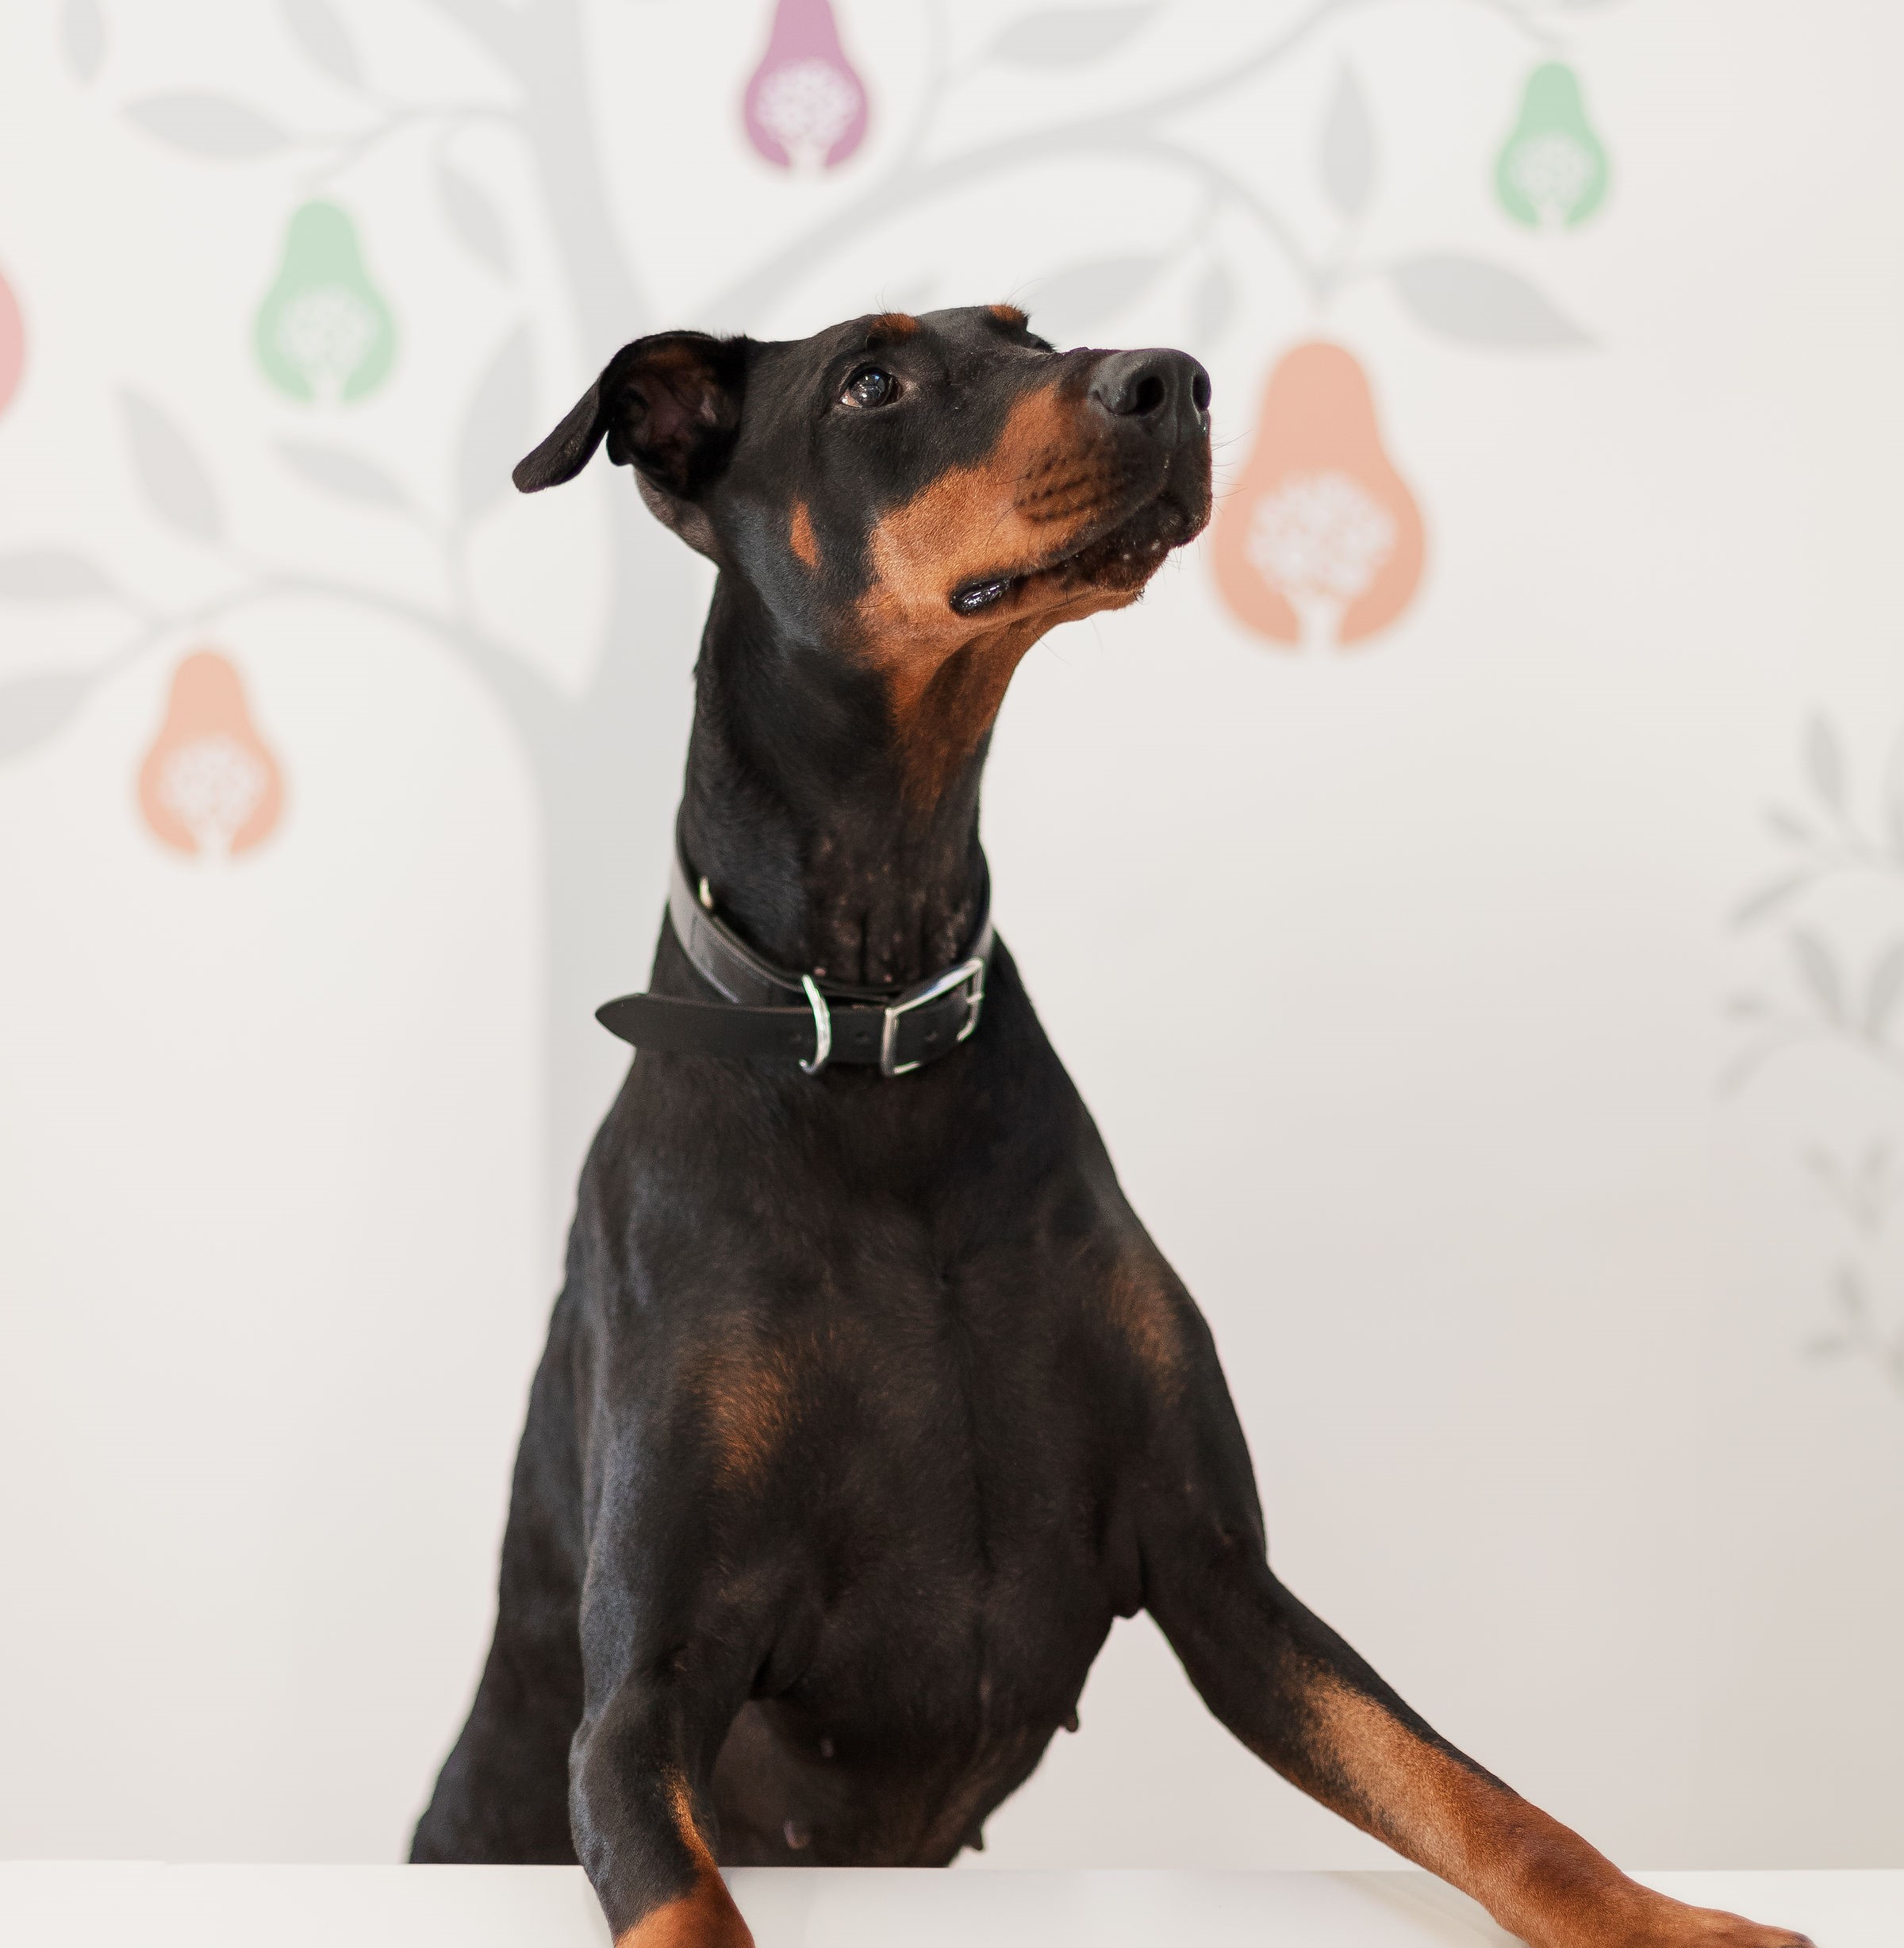 Photo of the office dog, Luna, who is a Doberman, looking attentively and sat in front of colourful logo